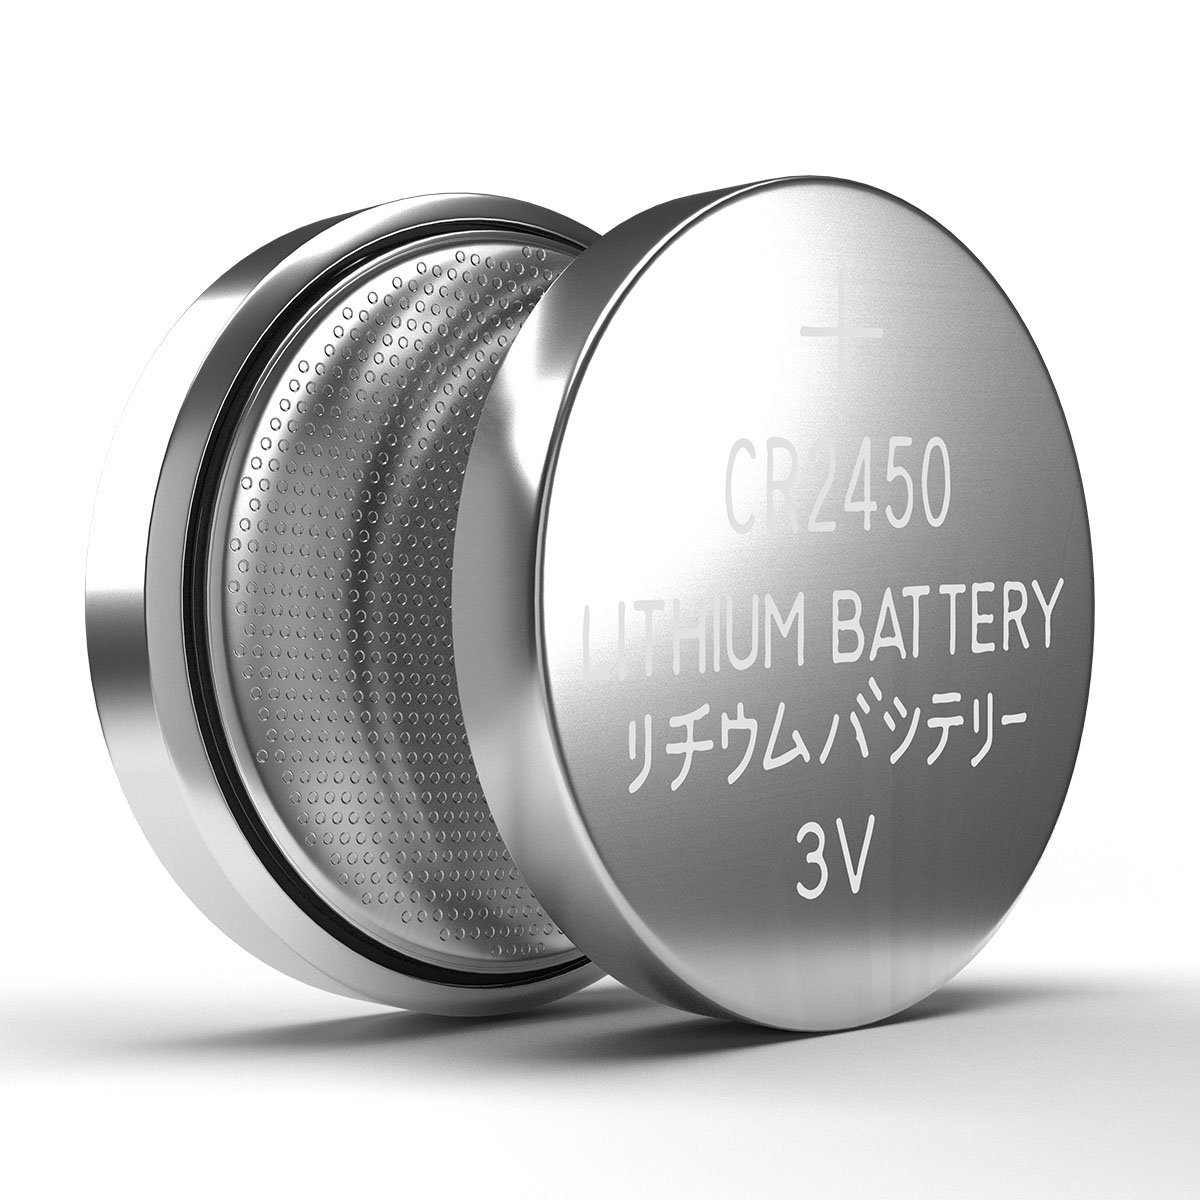 10 Pack CR1620 3V Lithium 1inch Coin Cell Batteries High Quality Li Ion  Cells From Weixcliaon, $12.07